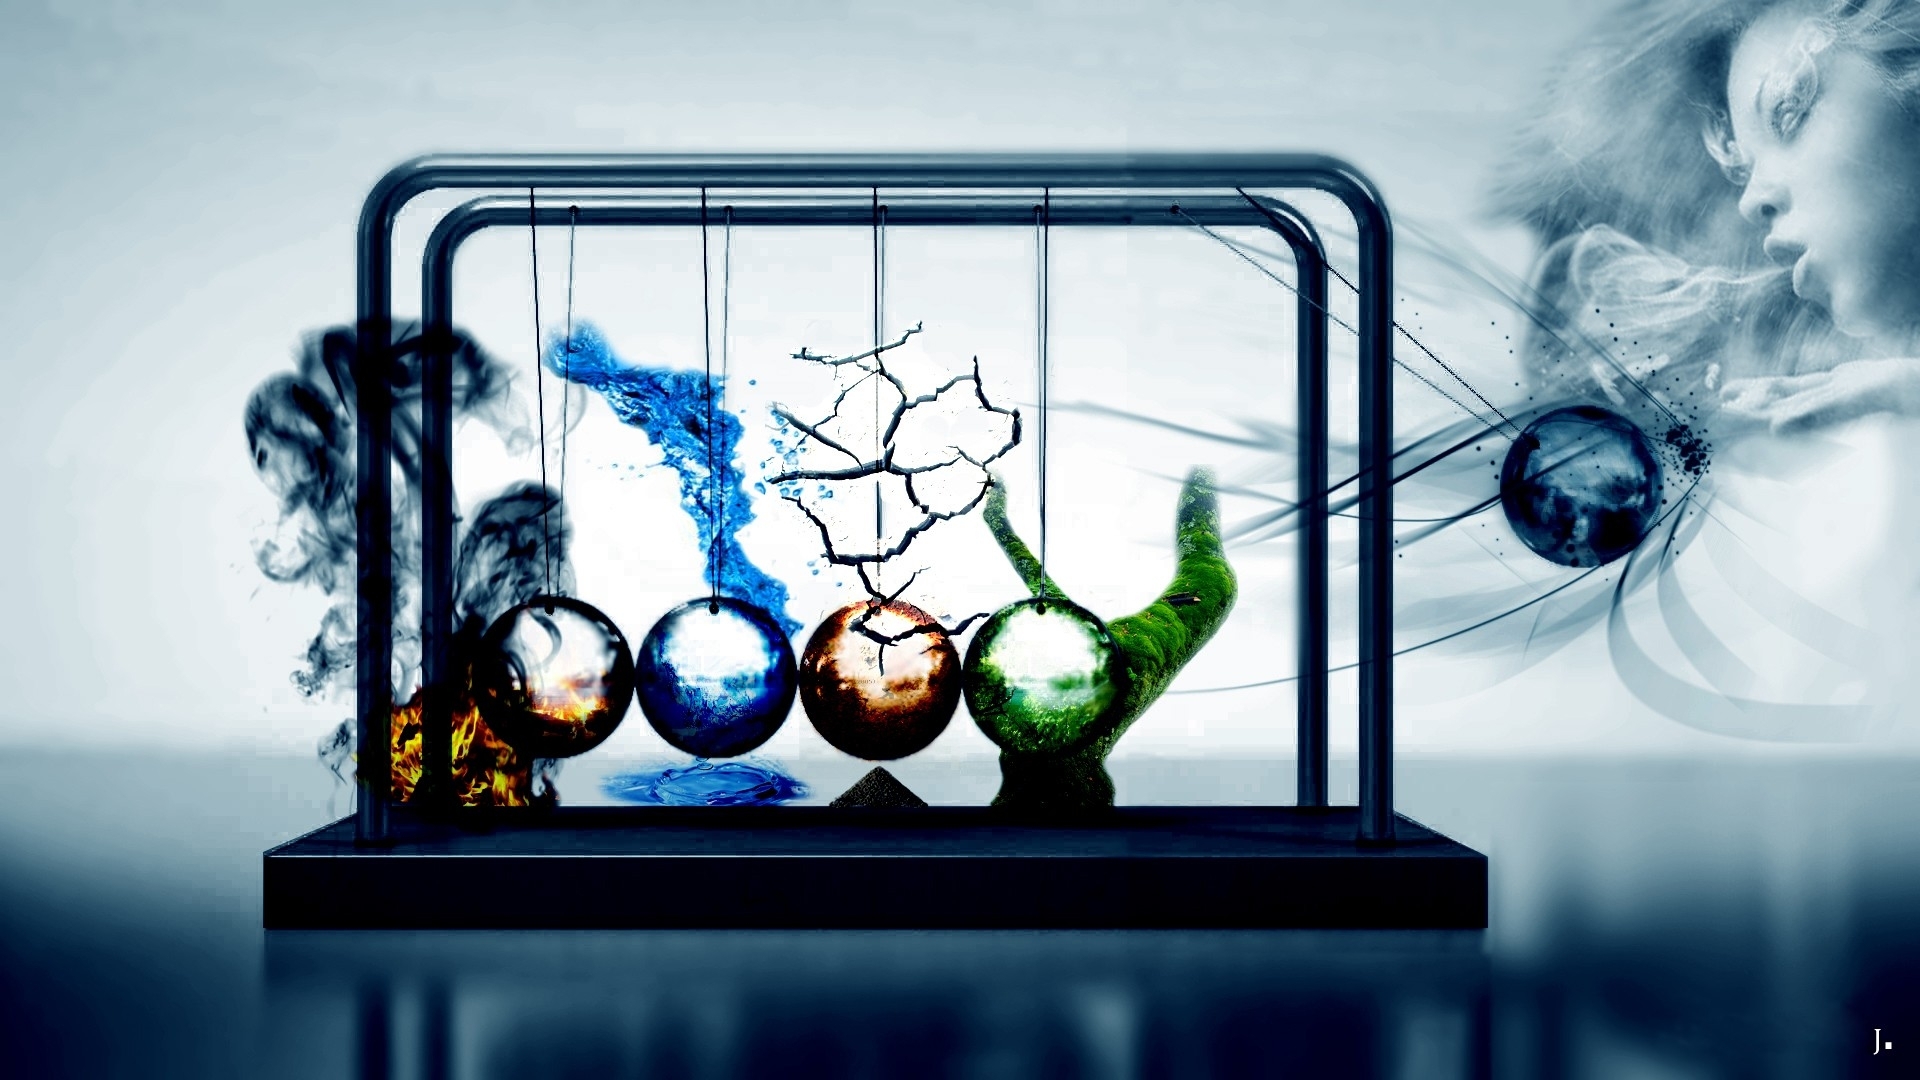 water, Abstract, Wood, Fire, Earth, Elements, Digital, Art, Artwork, Newtons, Cradle, Air, Four, Elements, Cg, Fantasy, Wome, Female, Girl, Wind Wallpaper